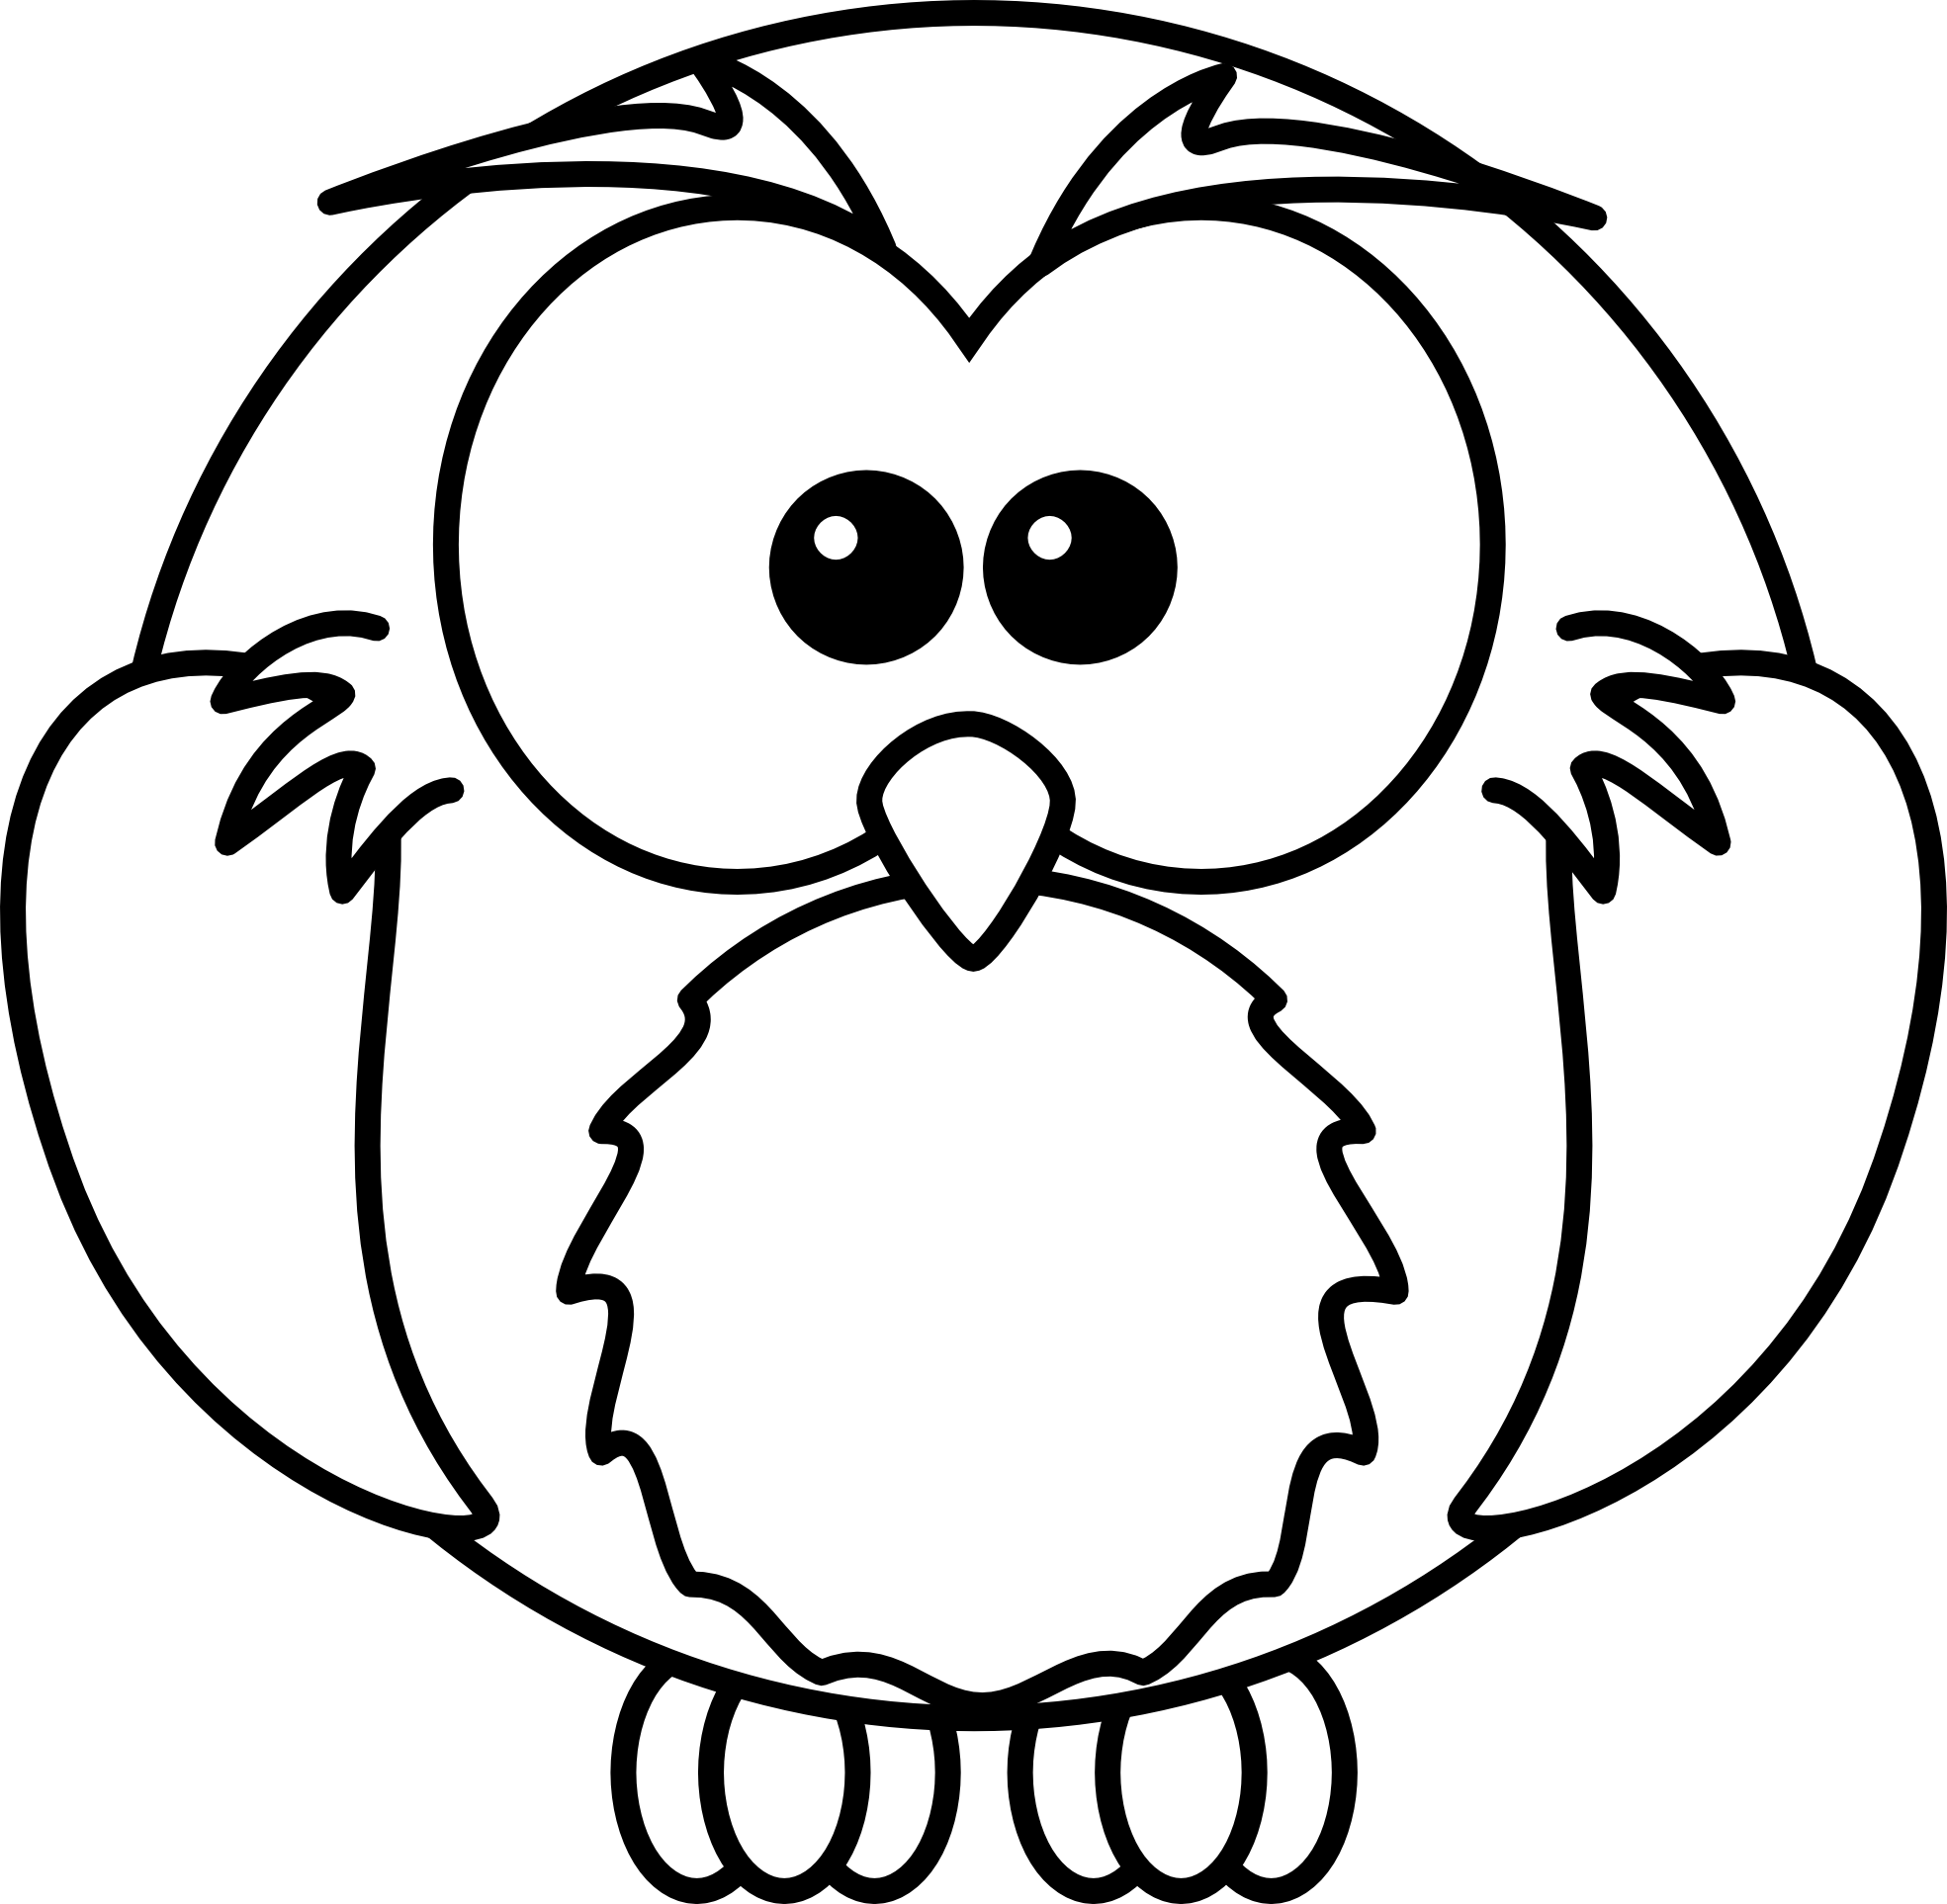 Baby Owl Clipart Black And Wh - Owl Clip Art Black And White